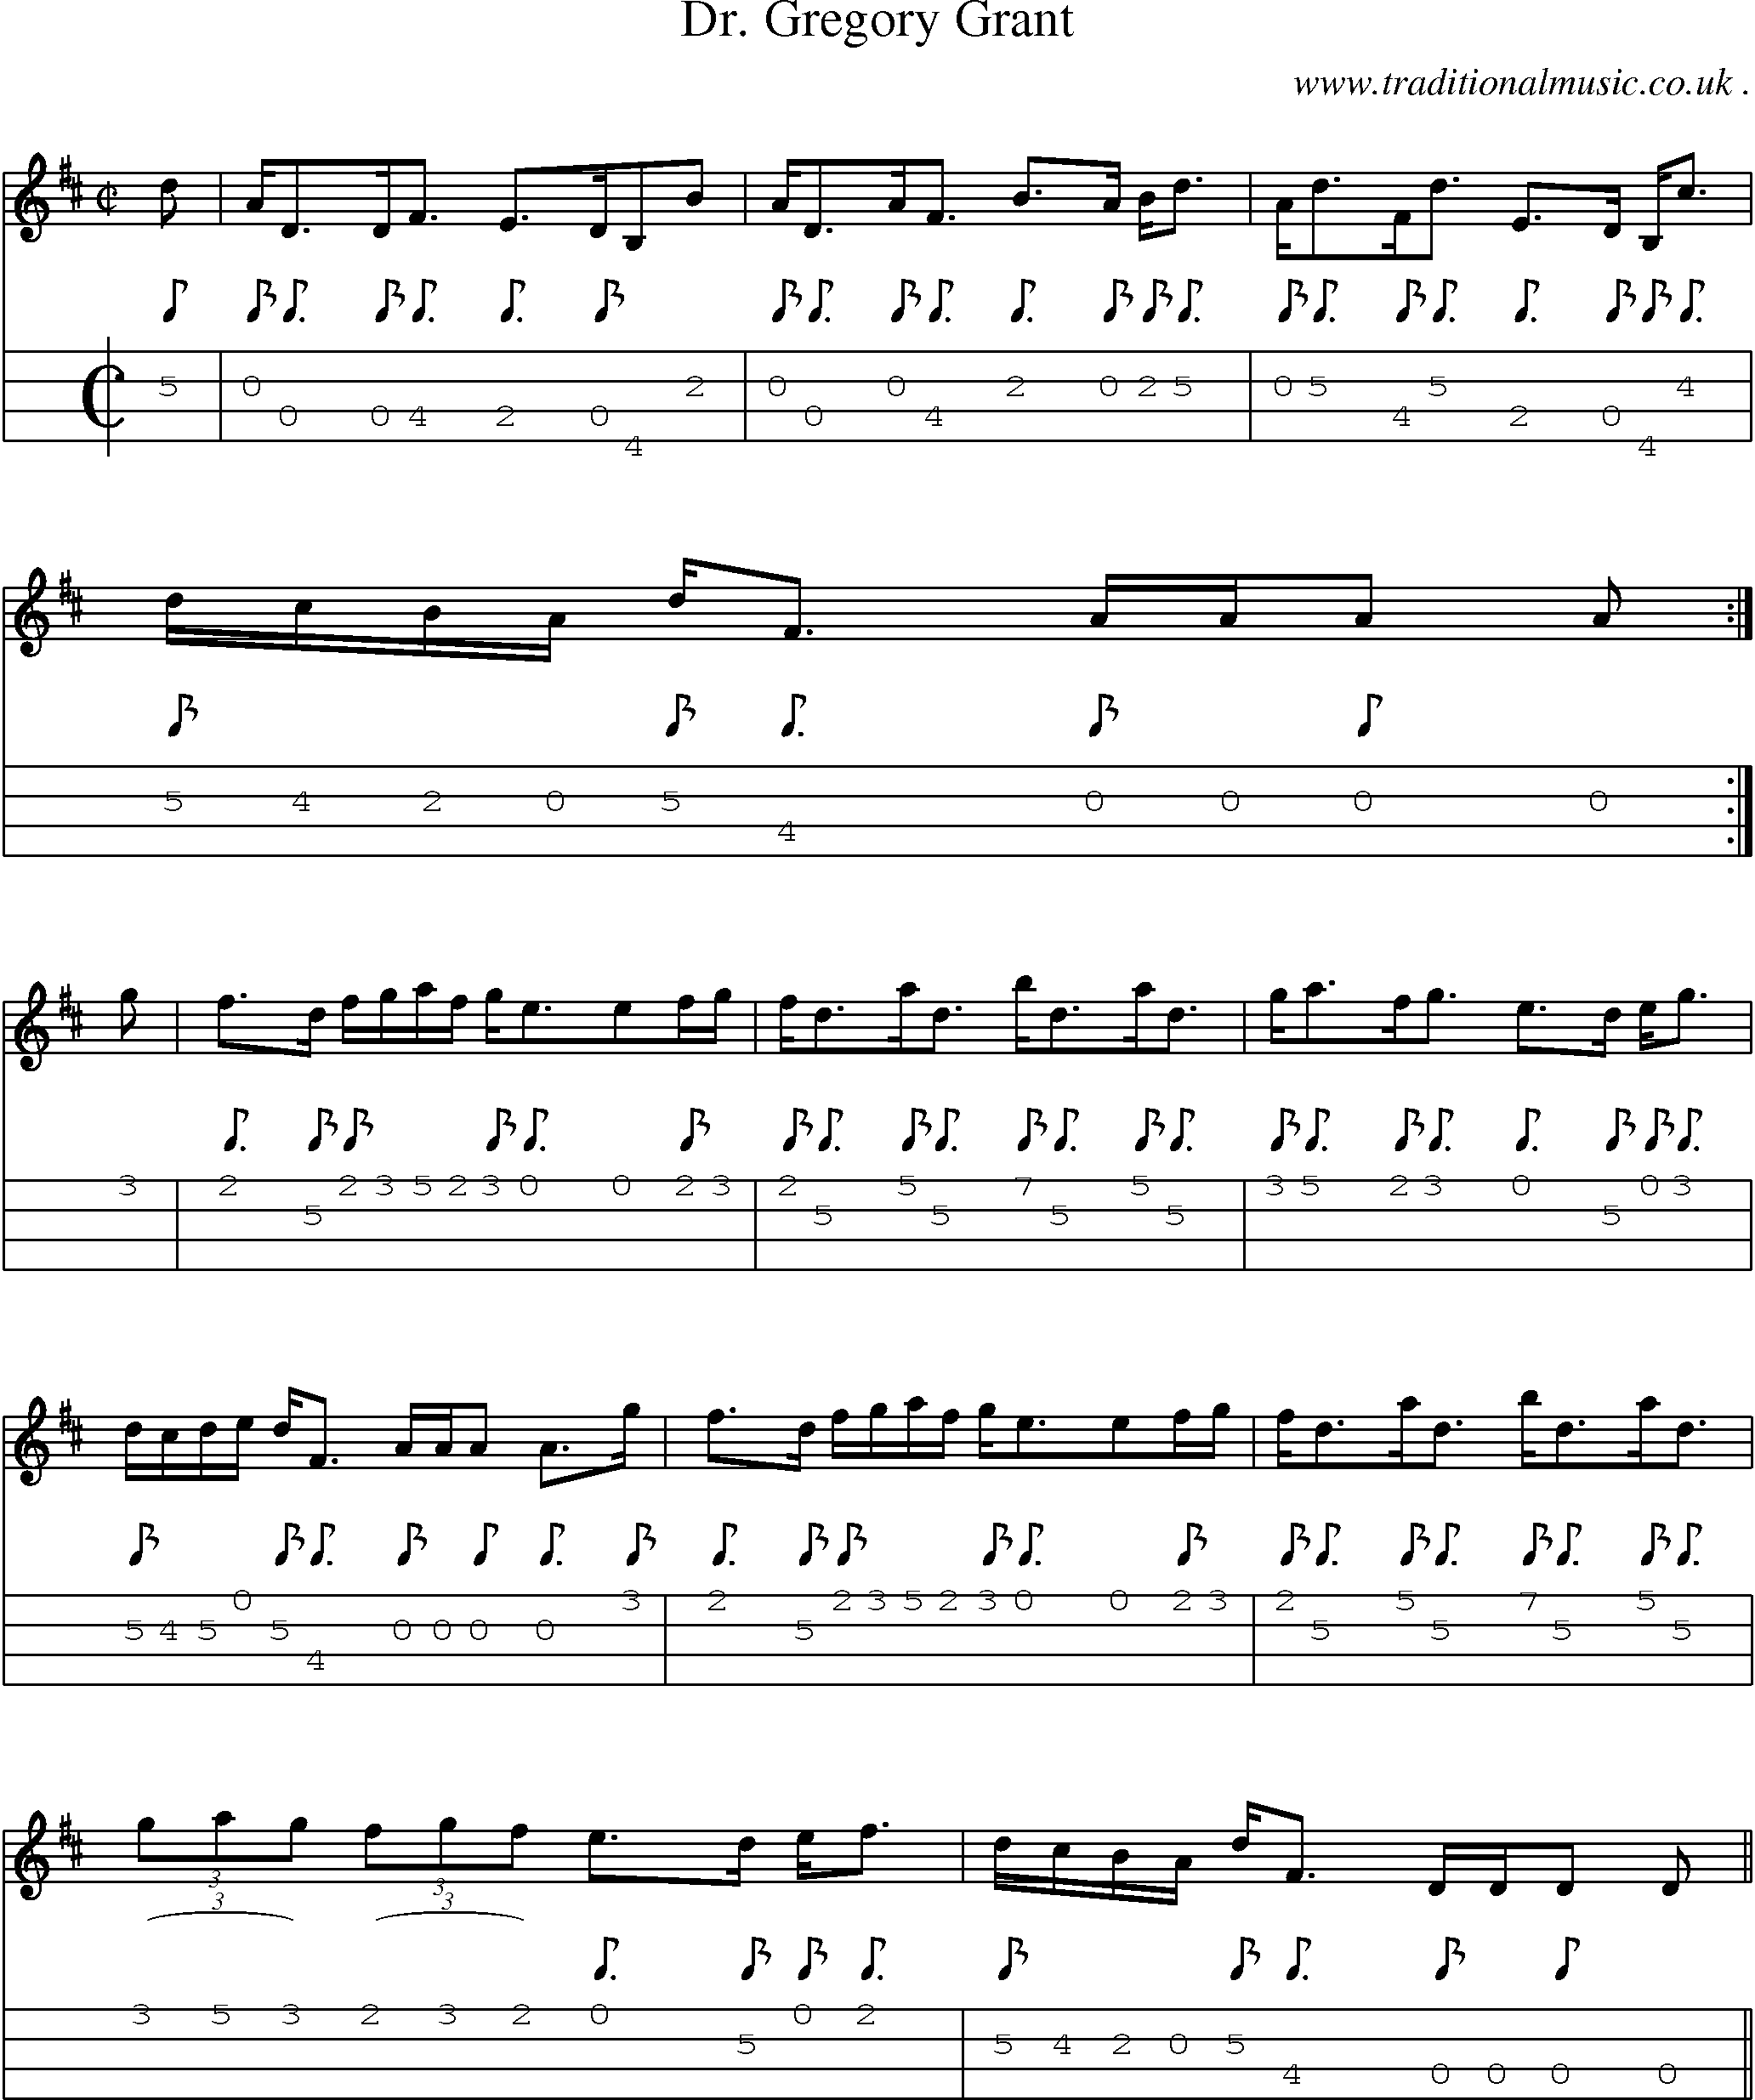 Sheet-music  score, Chords and Mandolin Tabs for Dr Gregory Grant